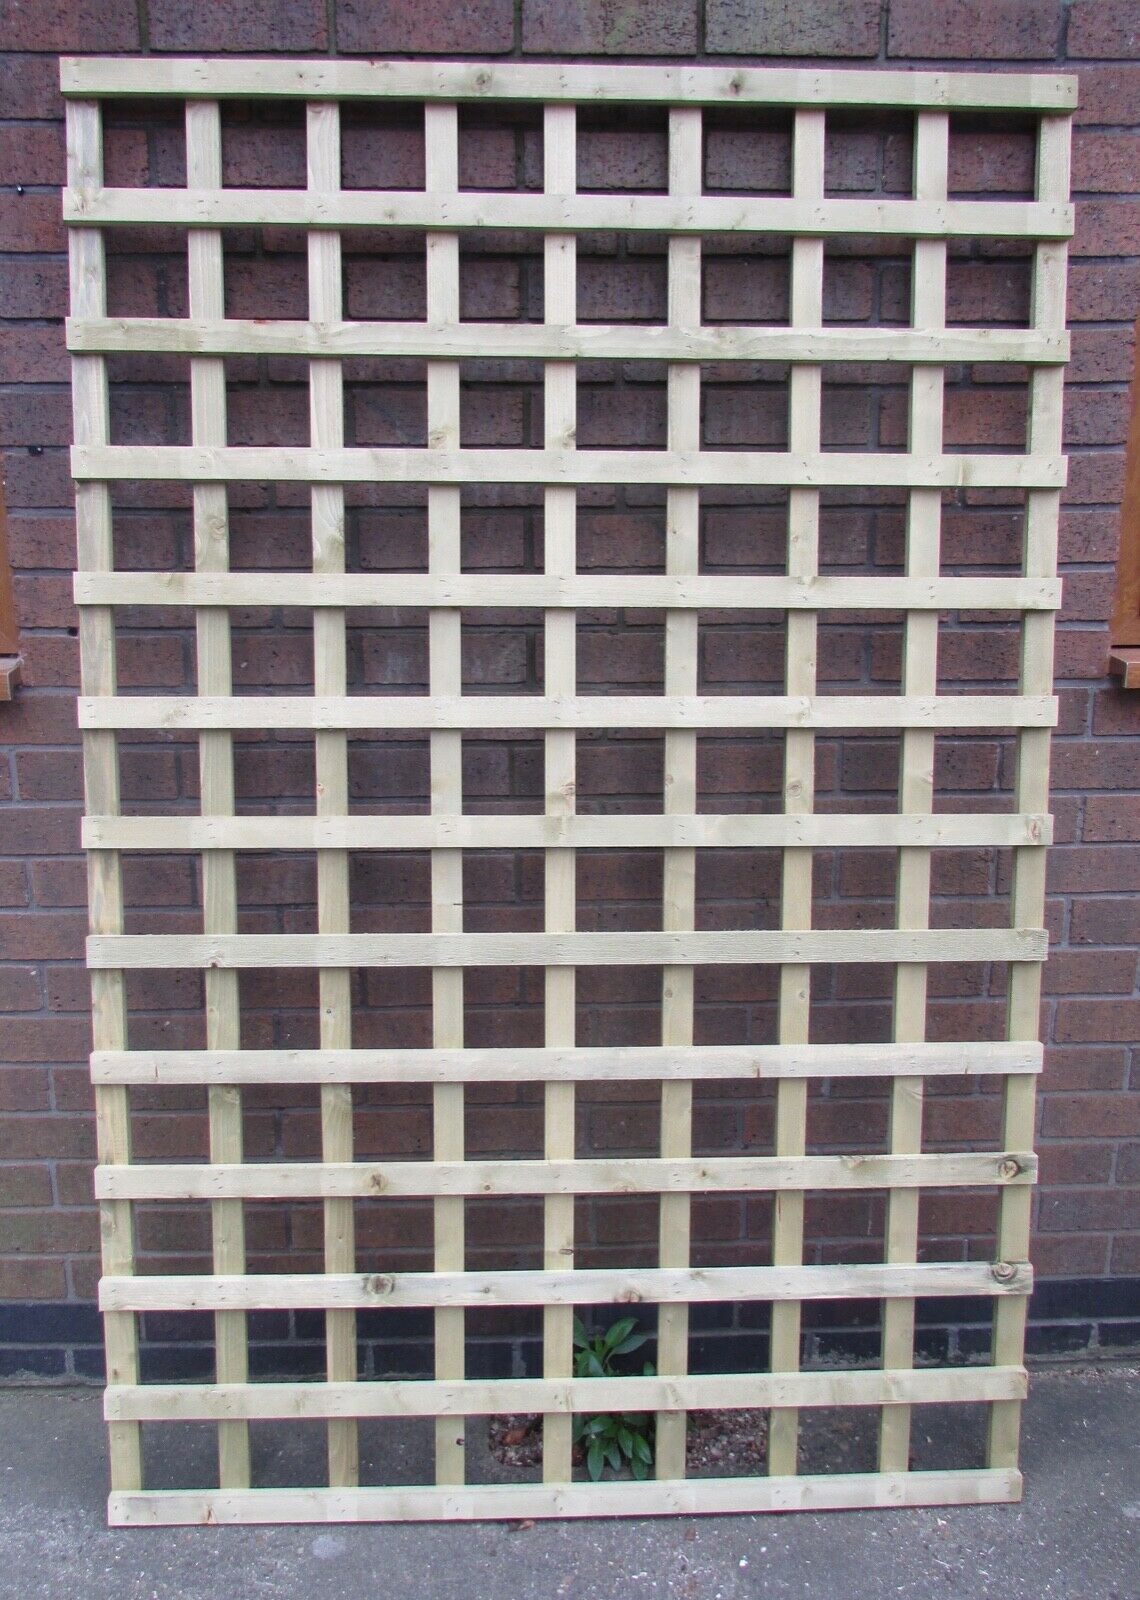 Square 6x4 wooden trellis against brick wall